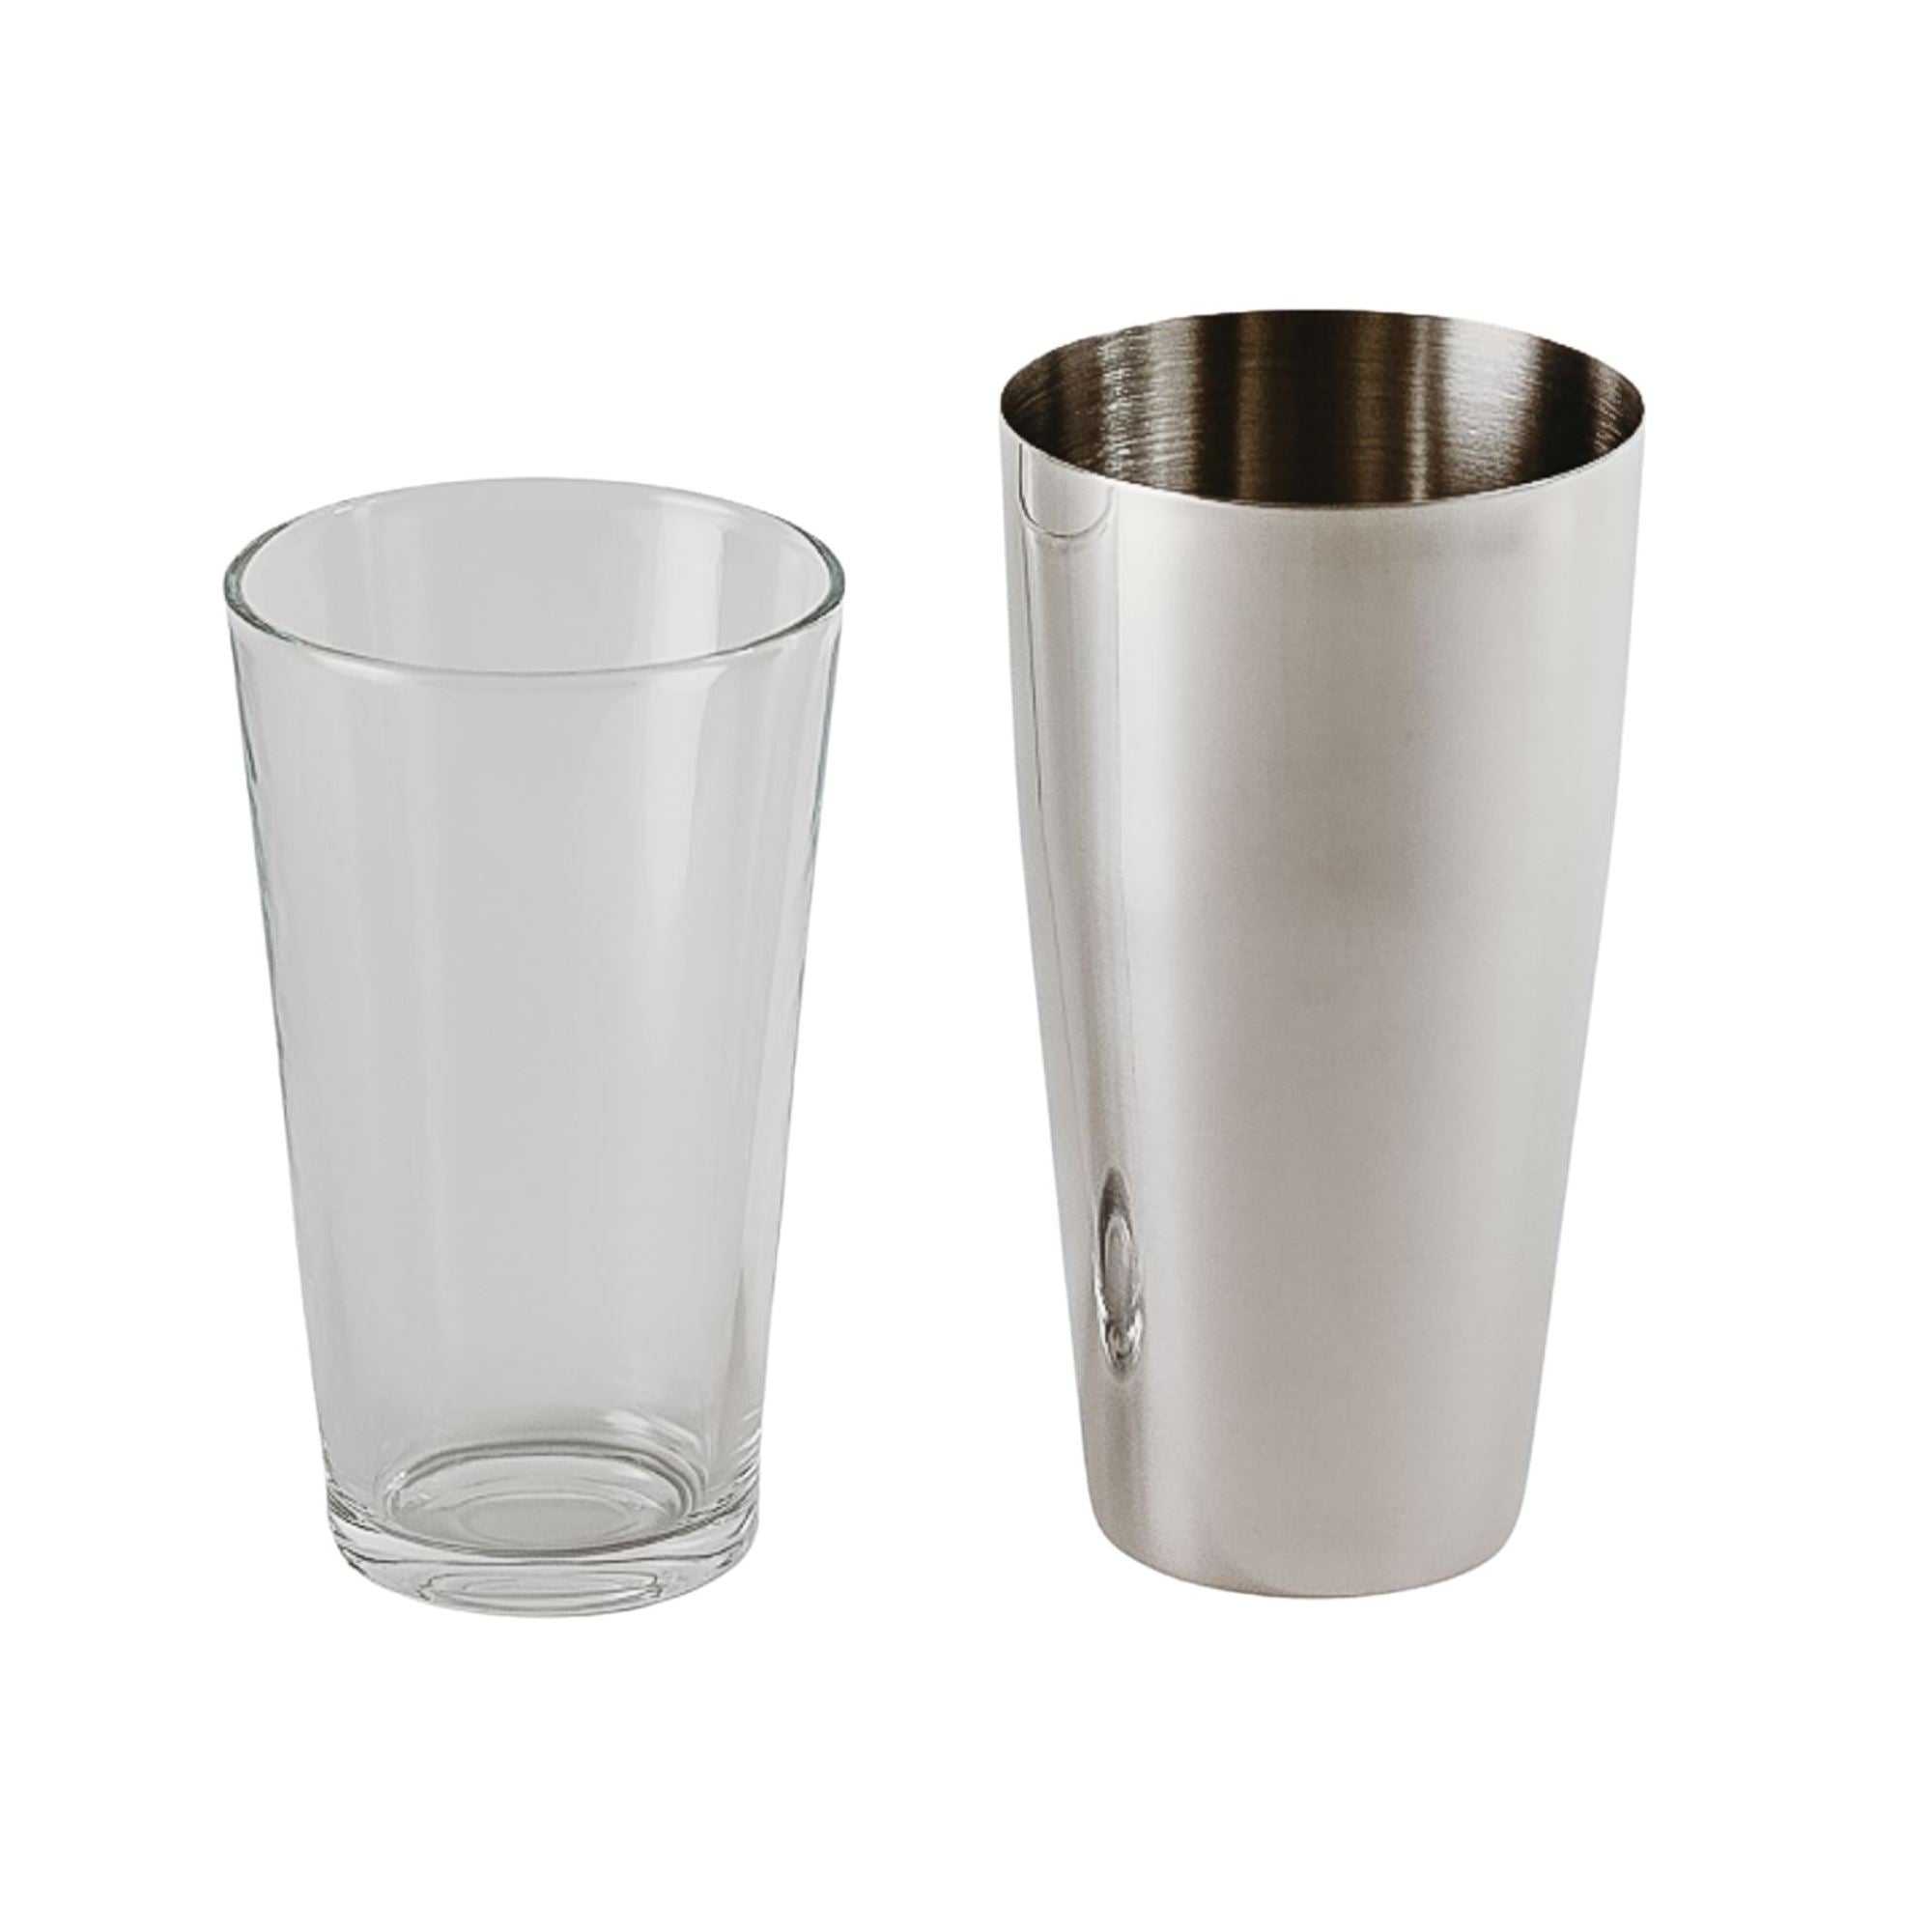 Stainless Steel Cocktail Shaker with Glass Cocktail Shaker D-STILL Drinkware 